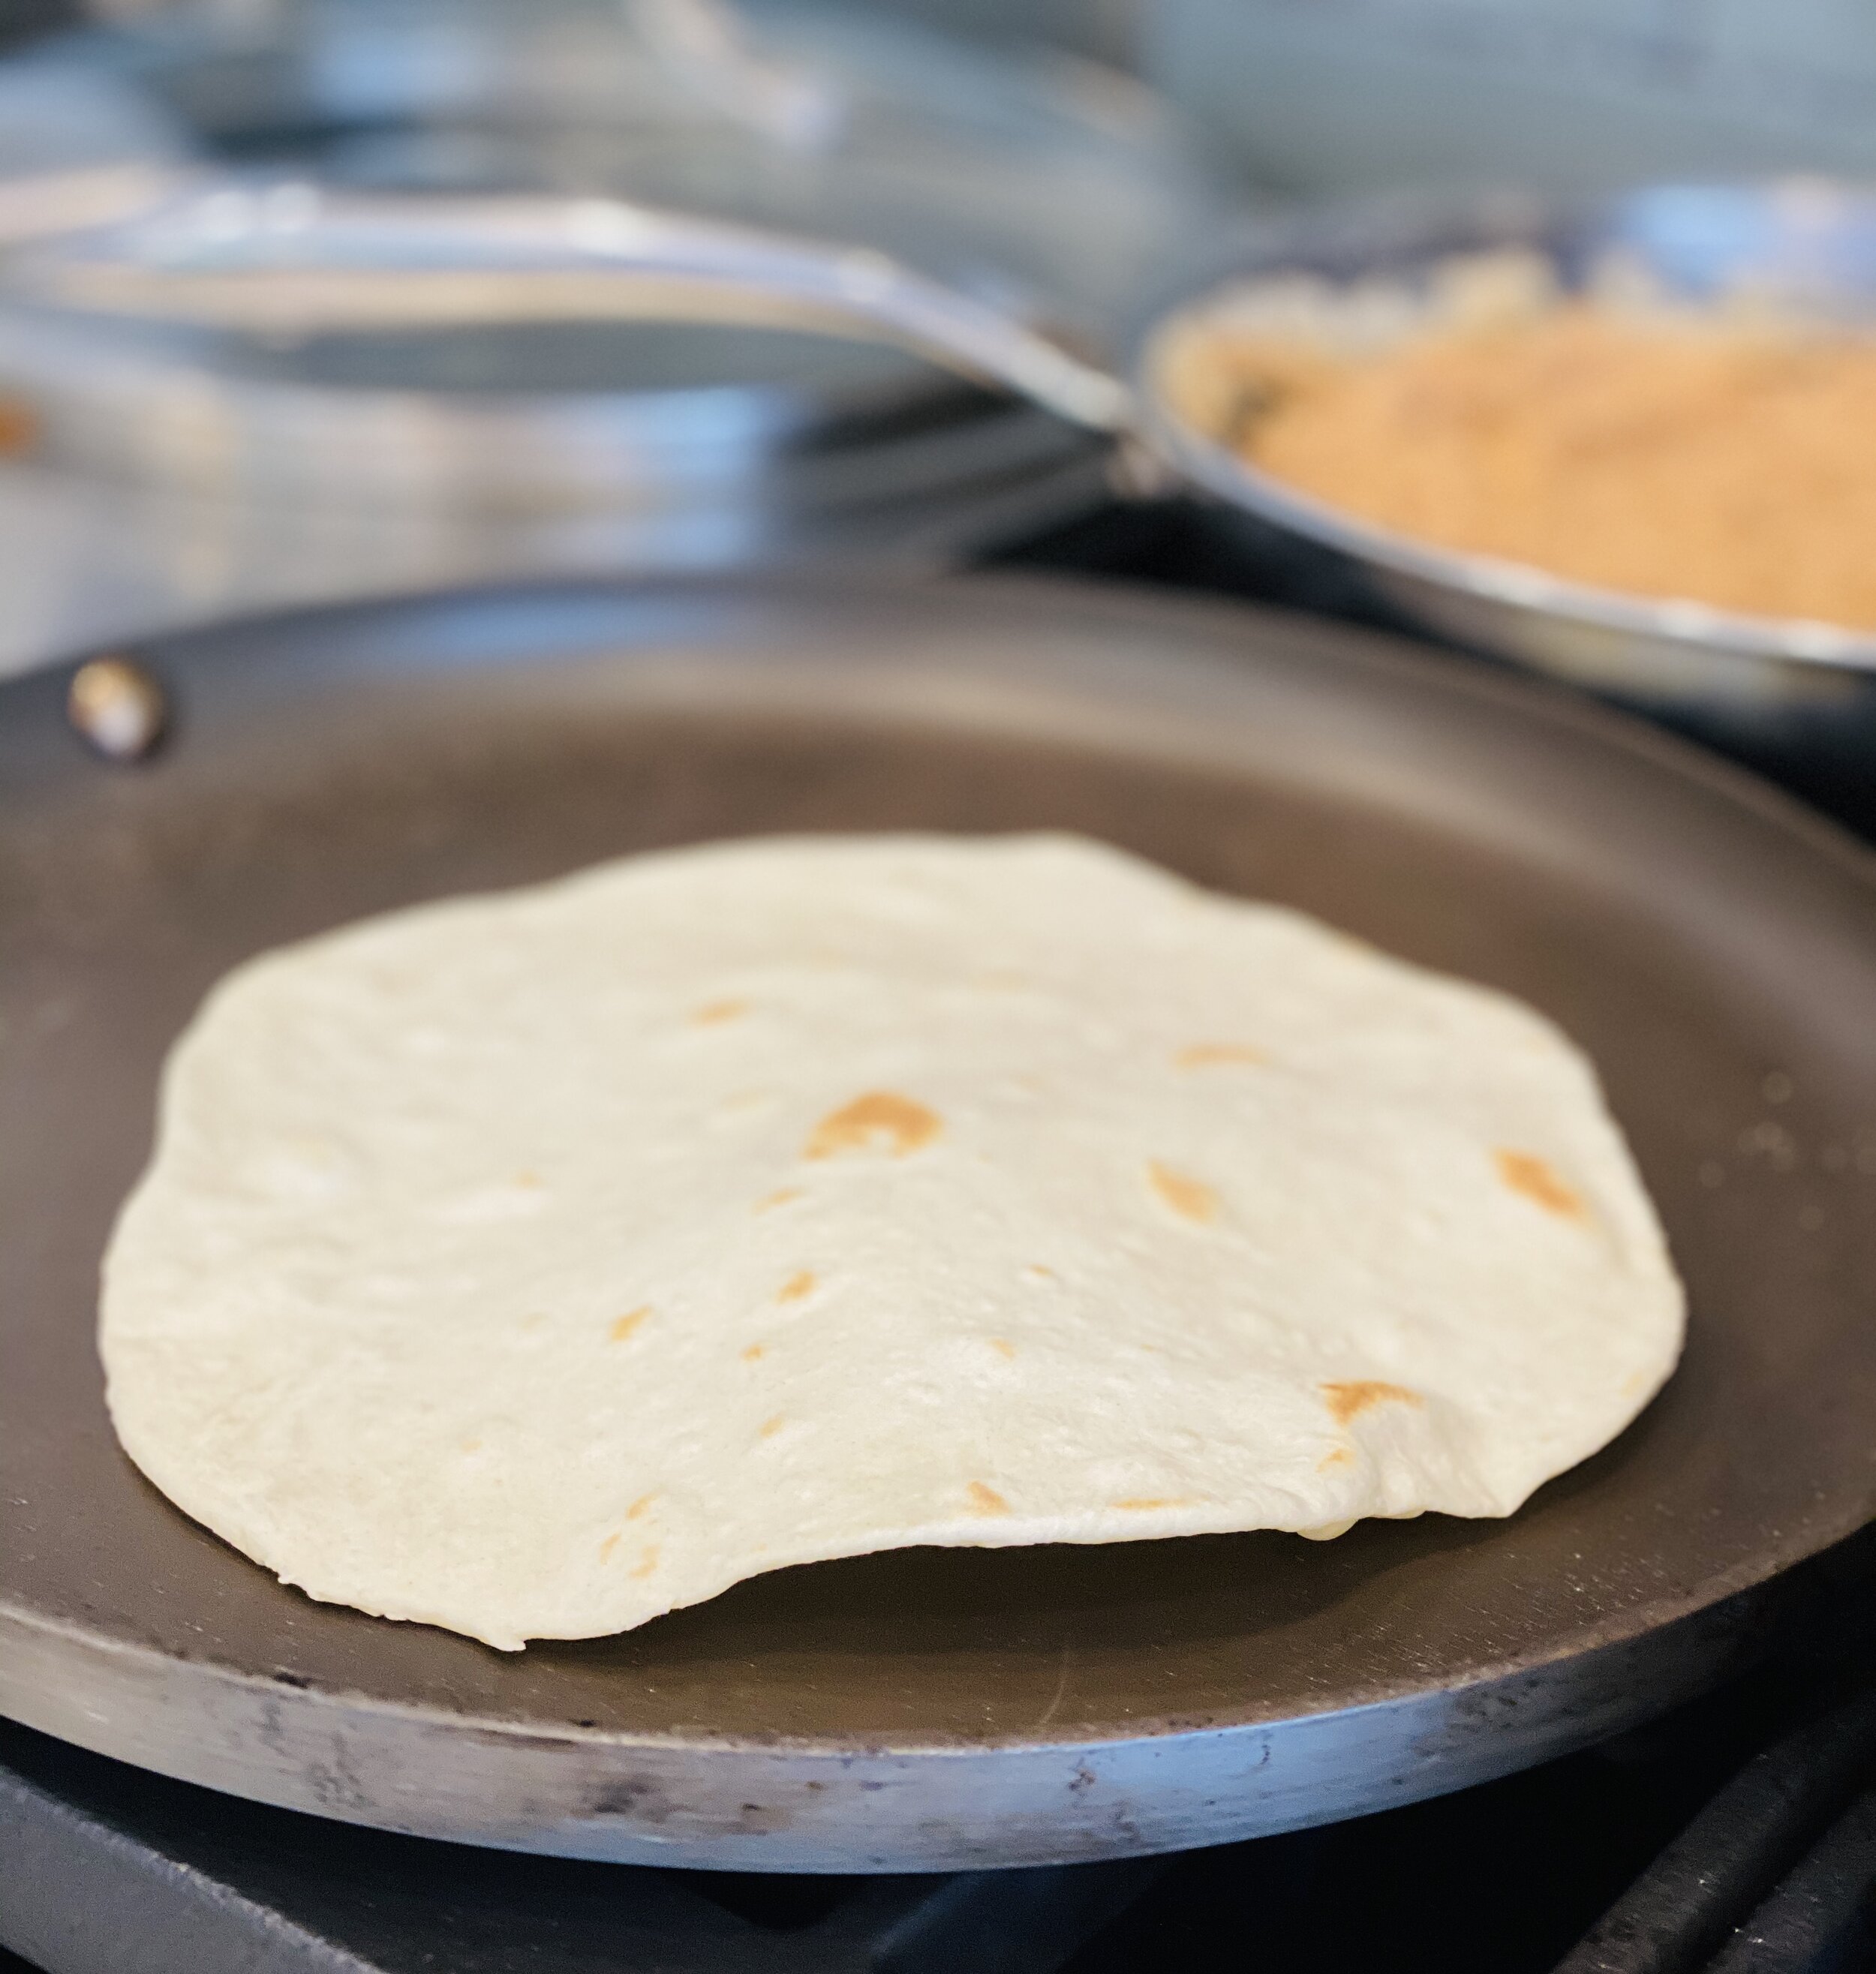 https://images.squarespace-cdn.com/content/v1/53f03dd1e4b027cf34f2fc4b/1583353249019-EY3O2ABB6UTGN86RAOZ5/Tortilla+de+harina+cooking+on+the+comal+with+refried+beans.jpg